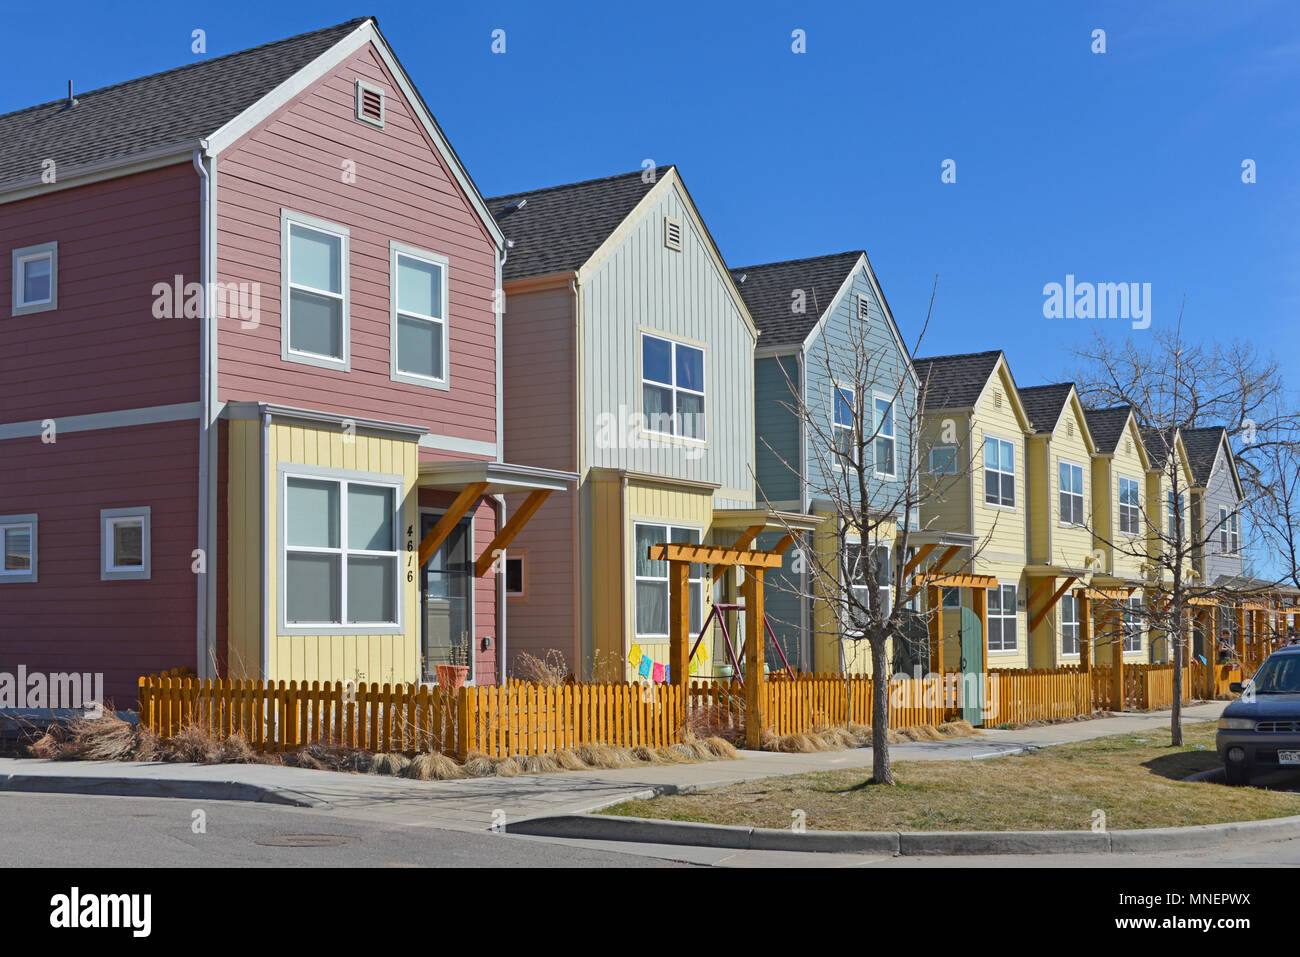 Holiday Neighborhood Project, depicting a row of single detached townhouses painted in different colors, Boulder, Colorado, USA Stock Photo